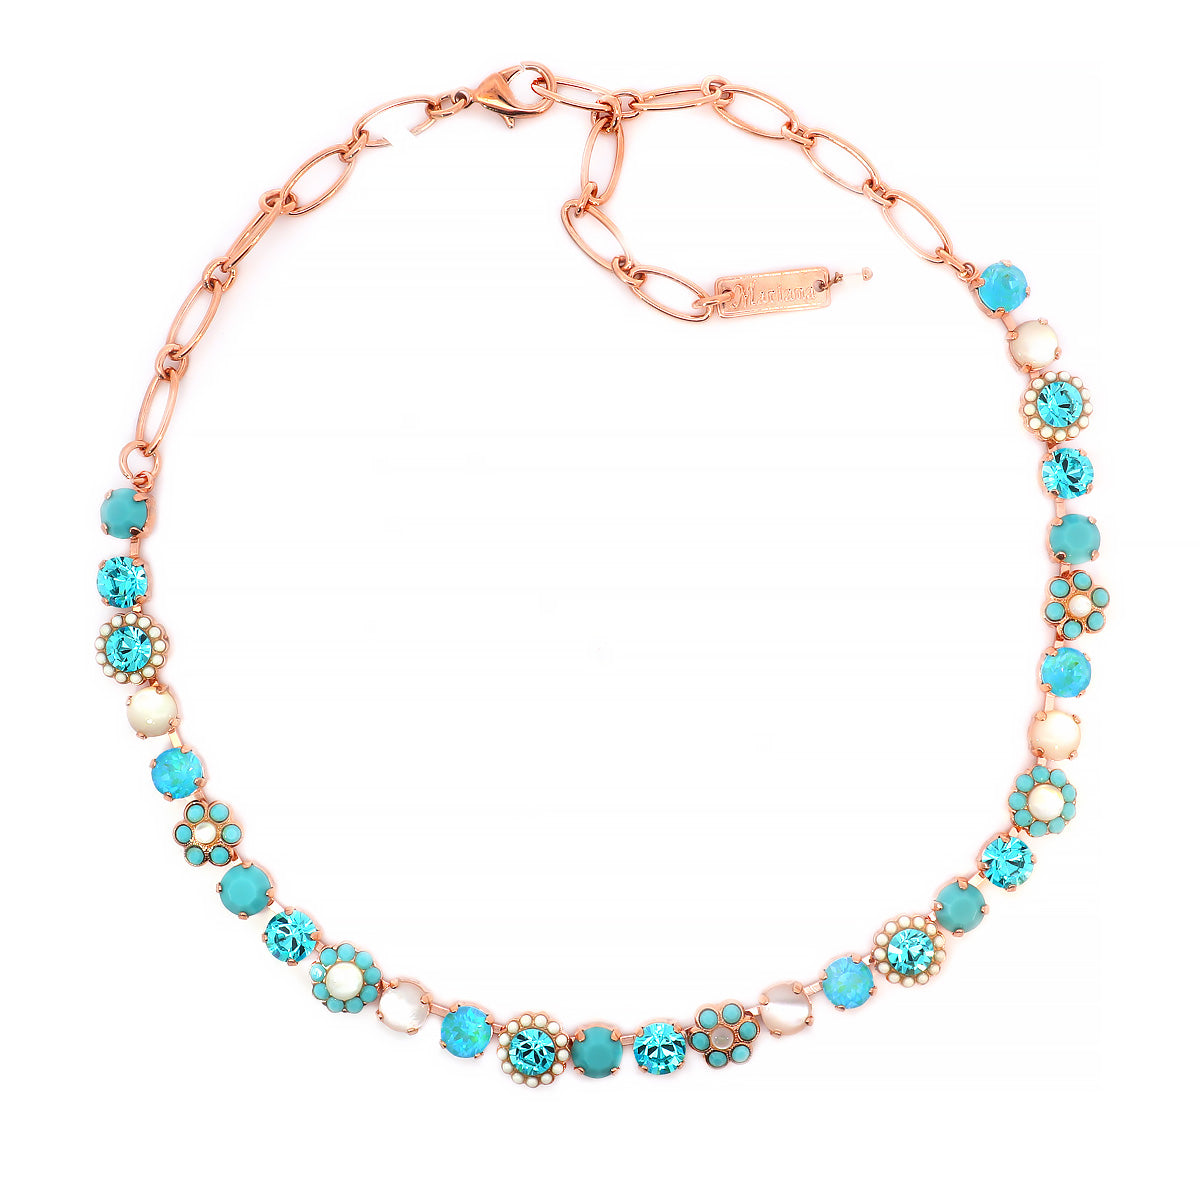 Mariana Treasures of the Sea Necklace N-3173/4 M4006